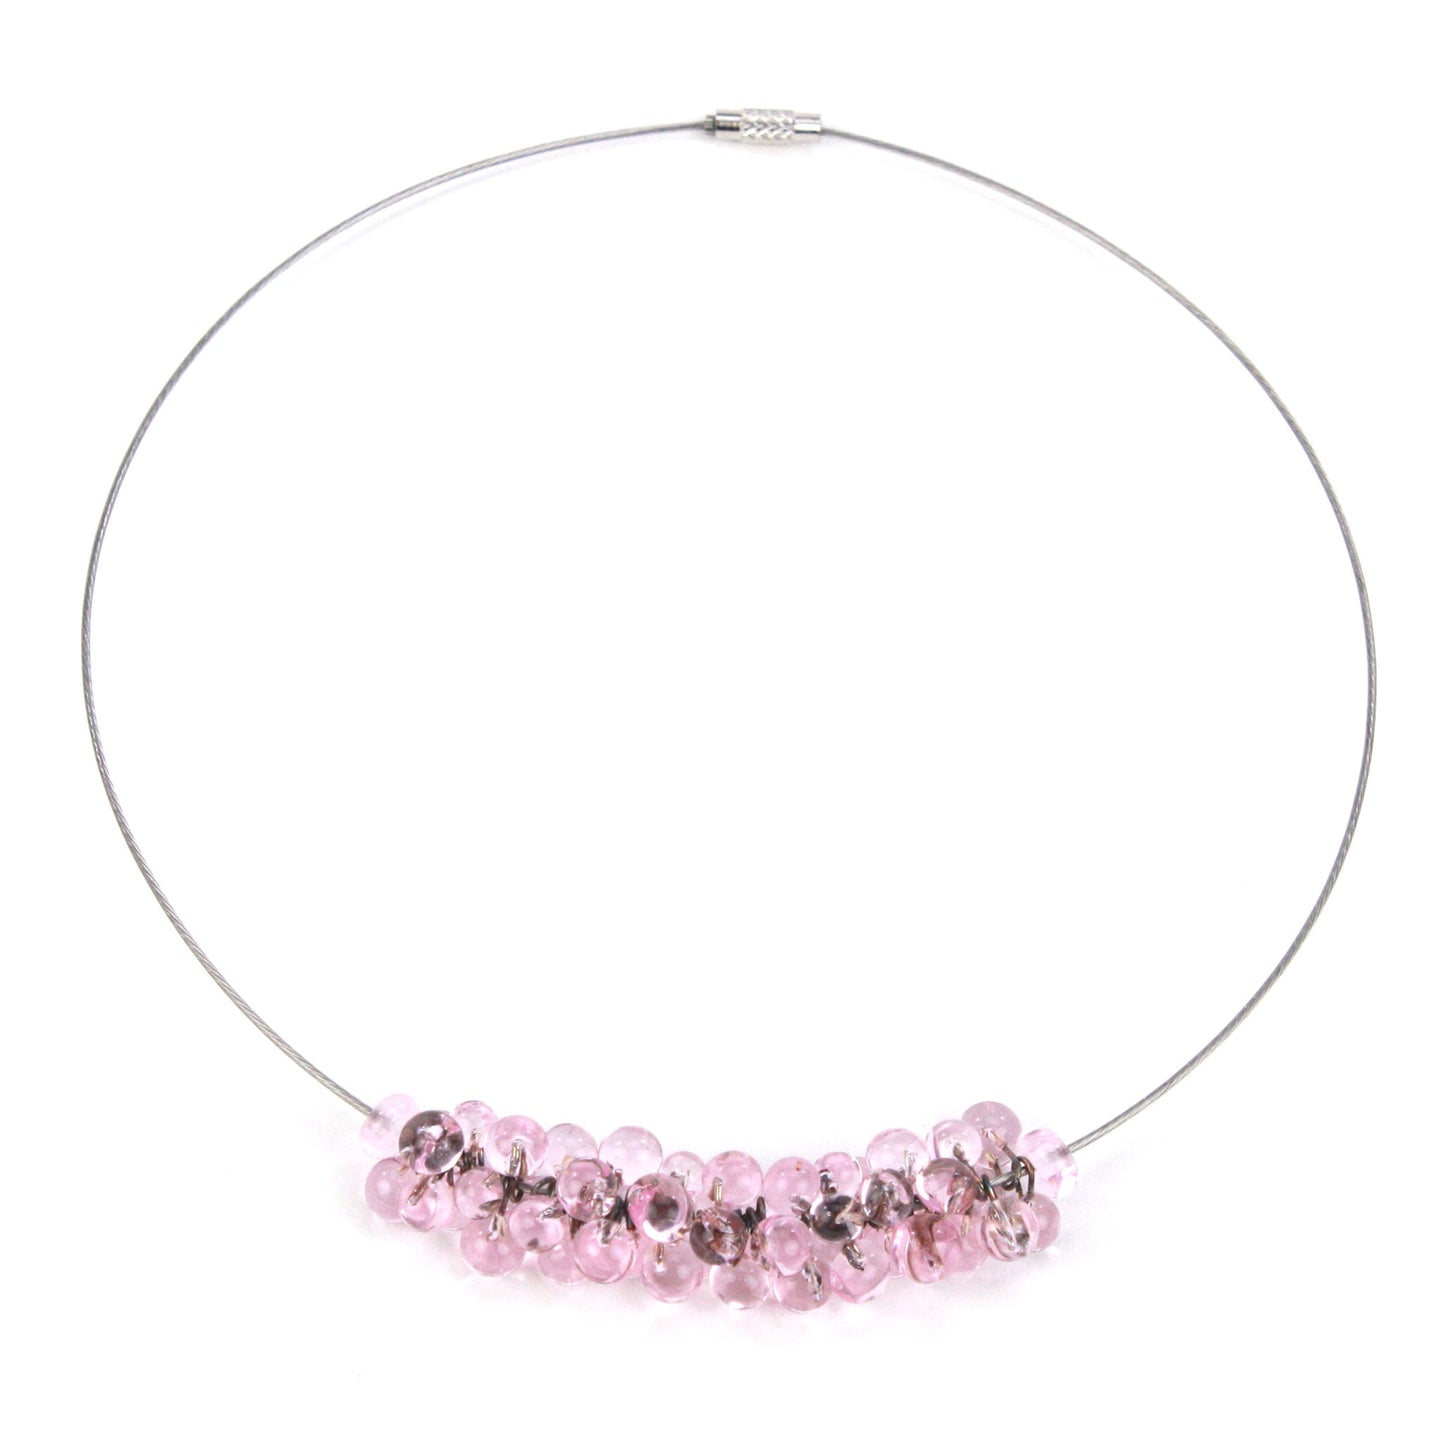 Petite Chroma Necklace in Pink